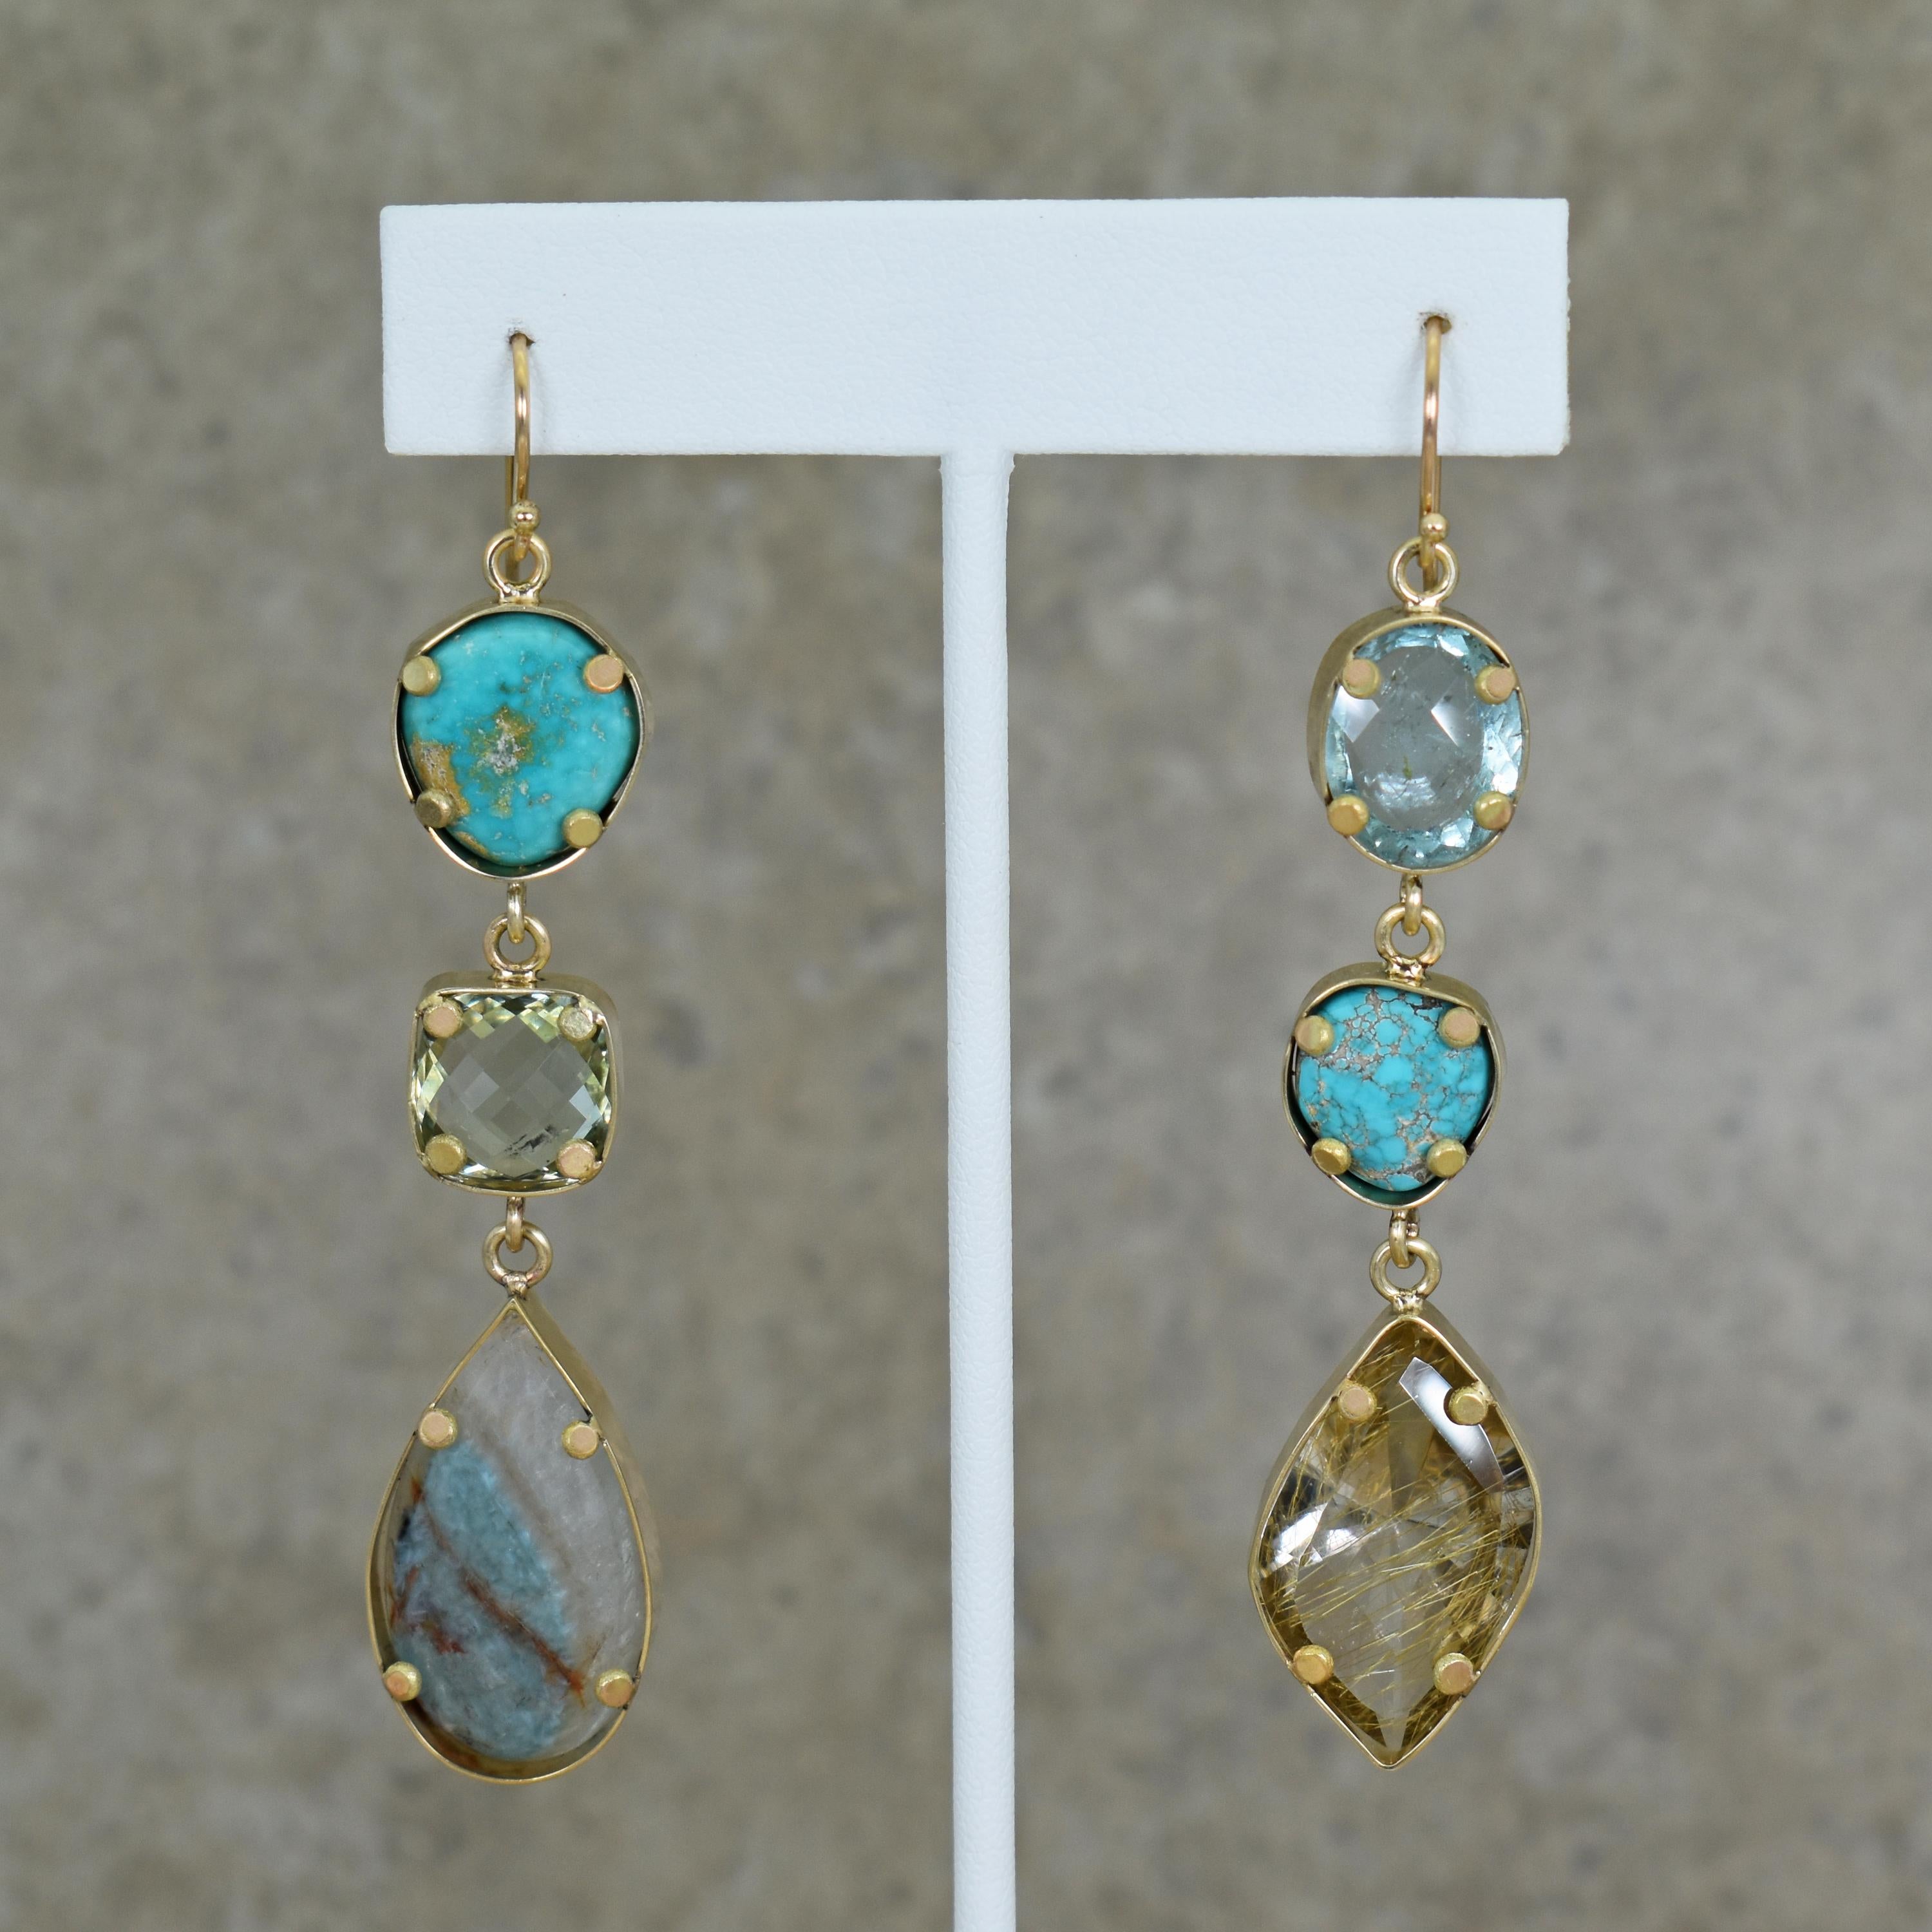 Blue Gem Turquoise, Lemon Quartz, Raw Paraiba Tourmaline, Aquamarine, and Rutilated Quartz 18 karat yellow gold asymmetrical dangle earrings. Dangle earrings are 3.13 inches in length. Unique and gorgeous mix of gemstones in these contemporary